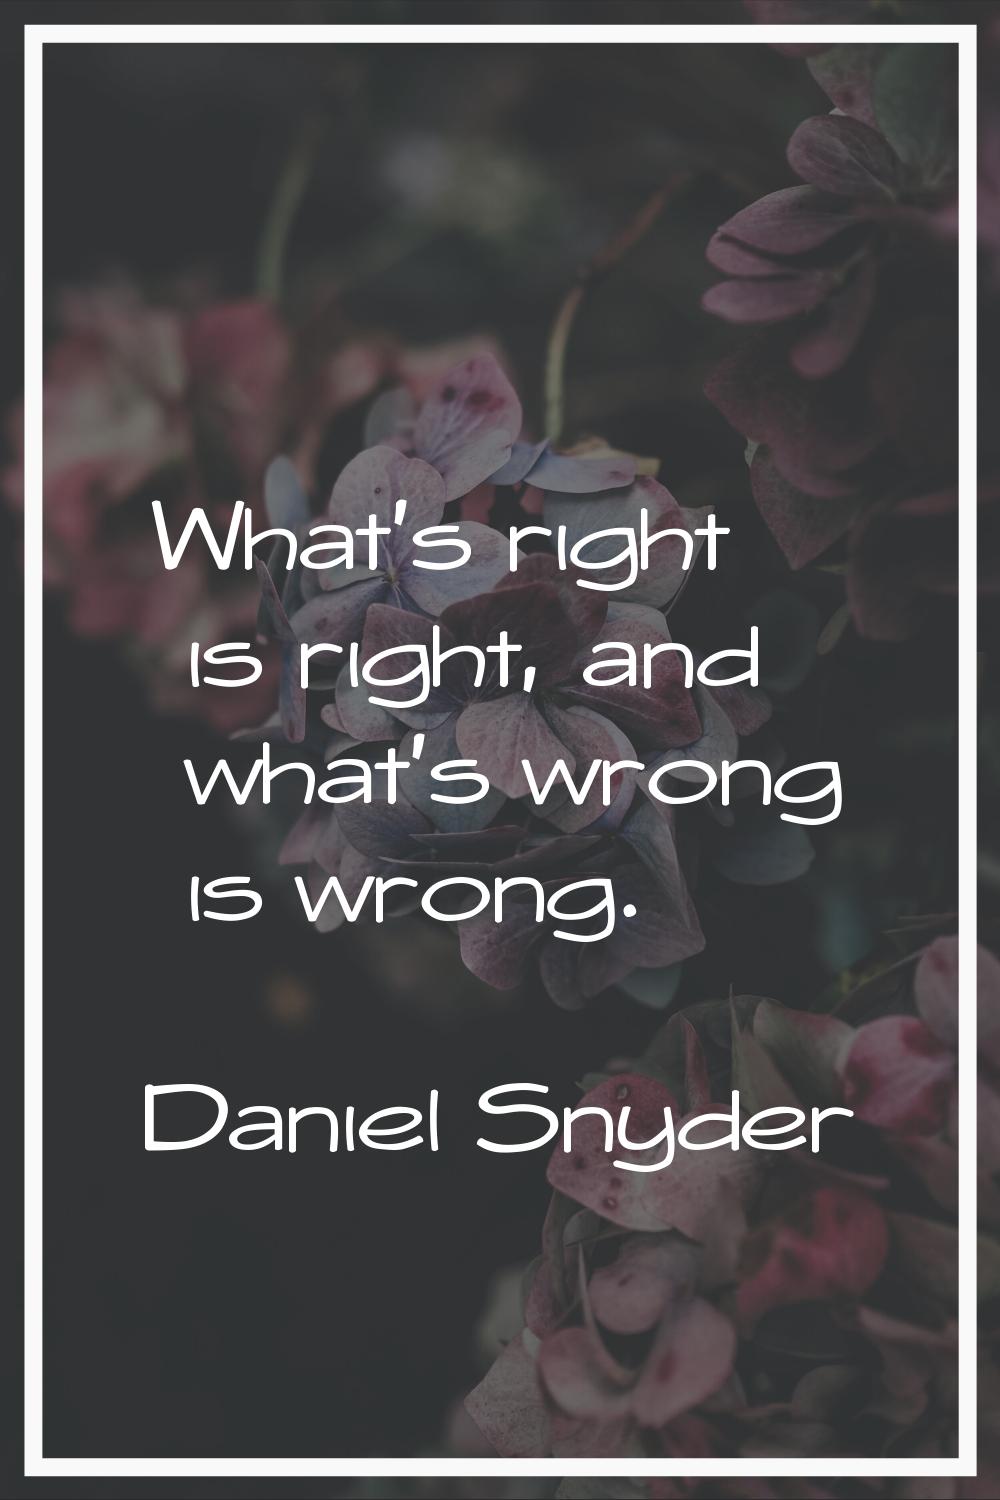 What's right is right, and what's wrong is wrong.